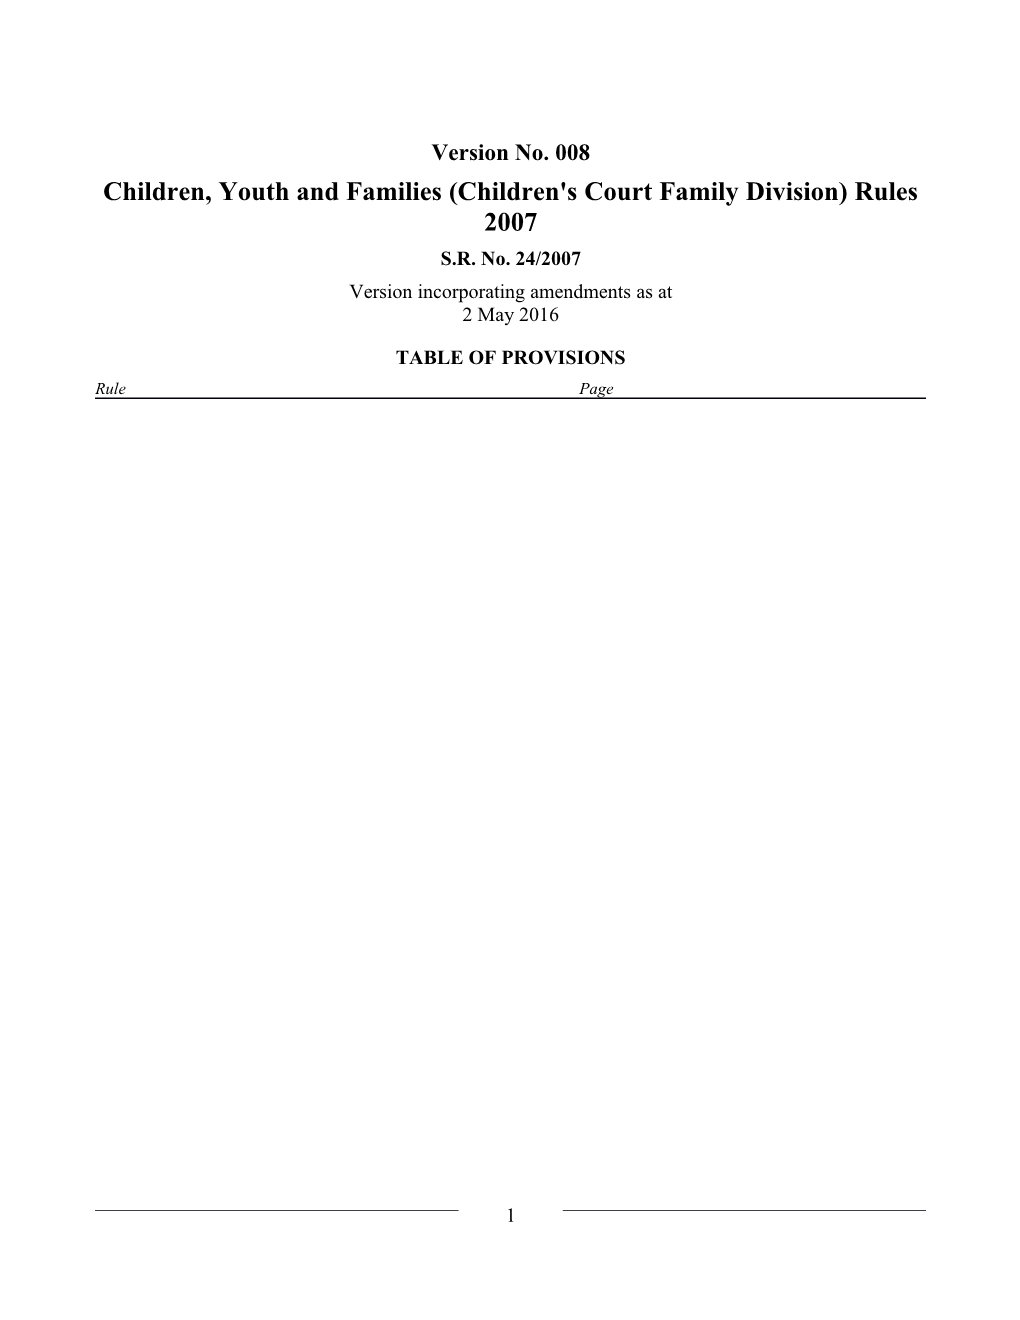 Children, Youth and Families (Children's Court Family Division) Rules 2007